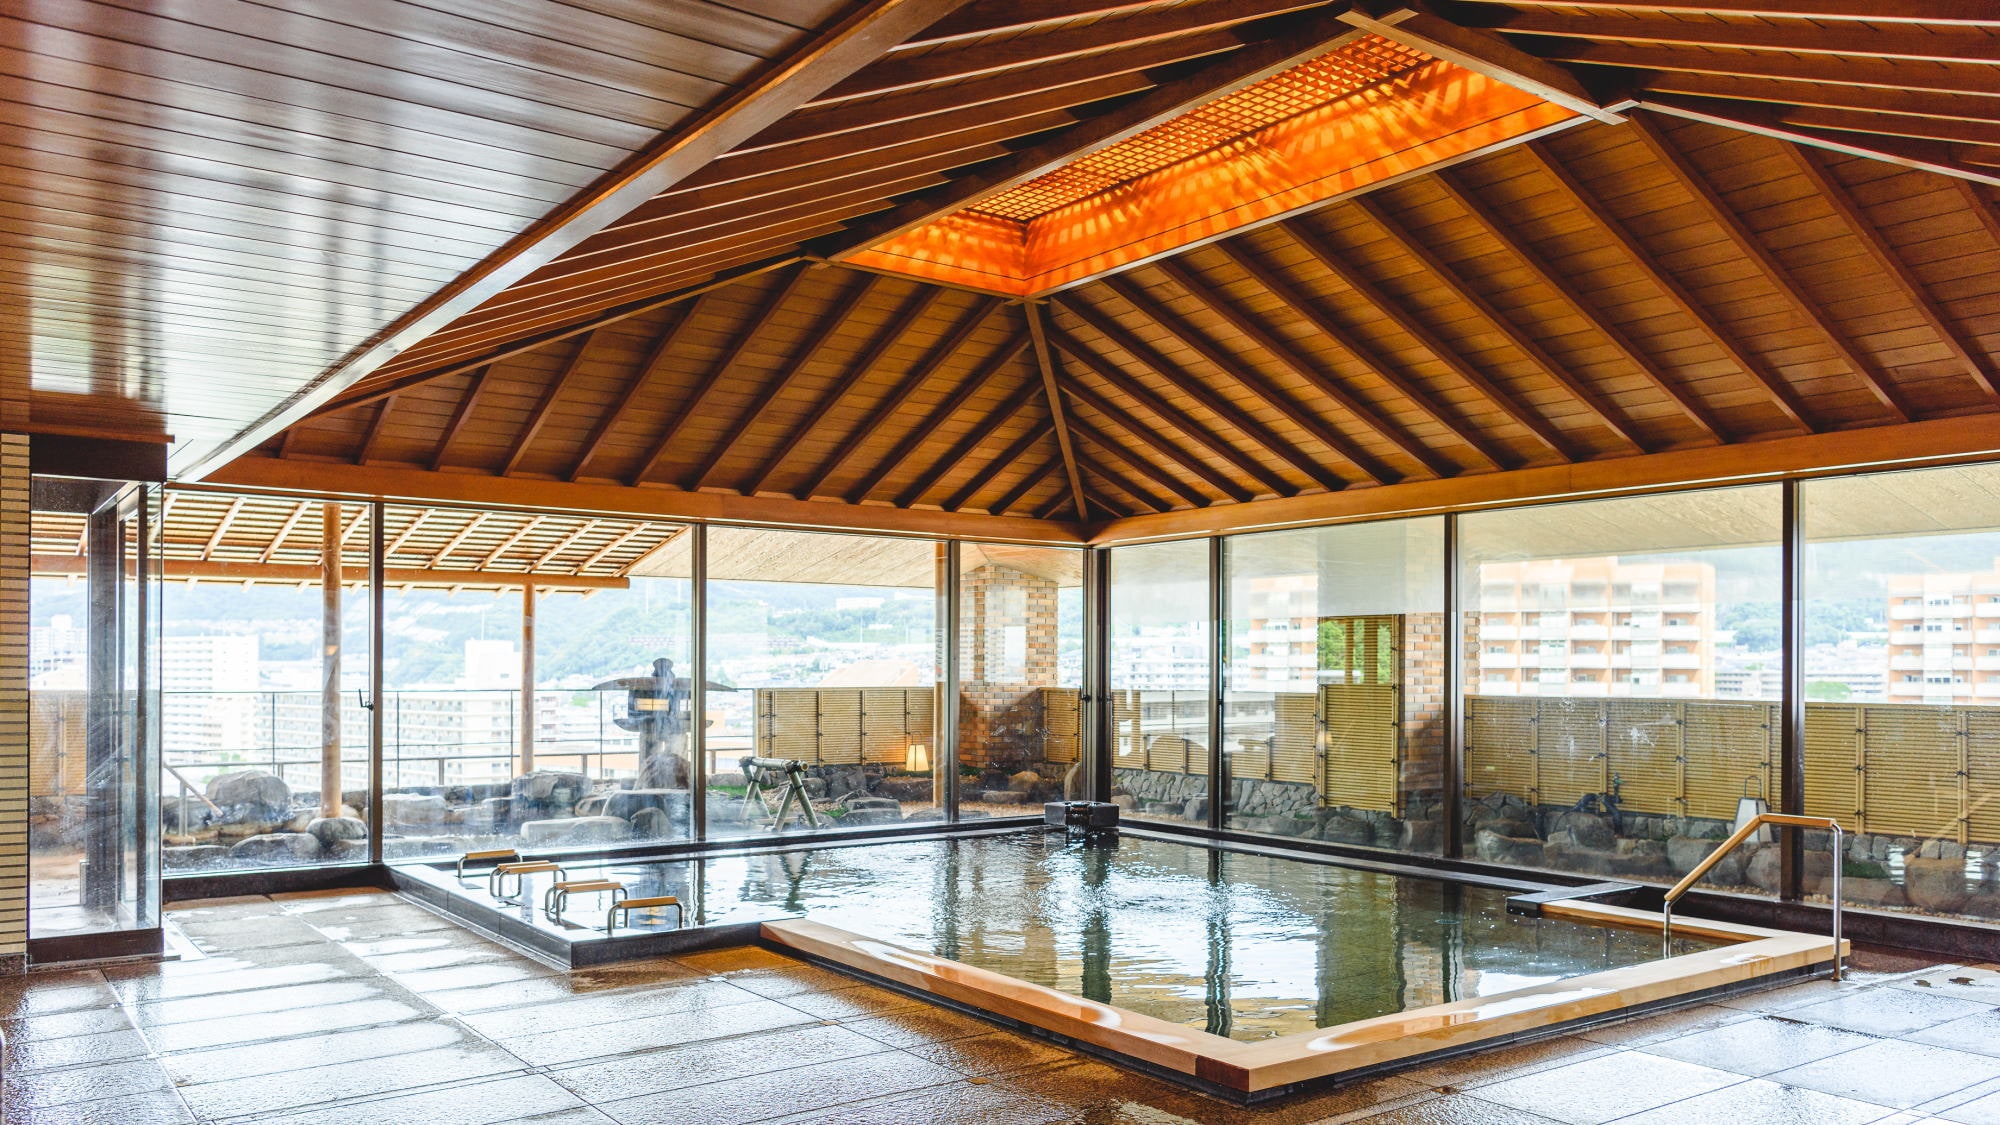 There is also a jet bath at the large communal bath with a view of the palace, so you can refresh your body on a daily basis.